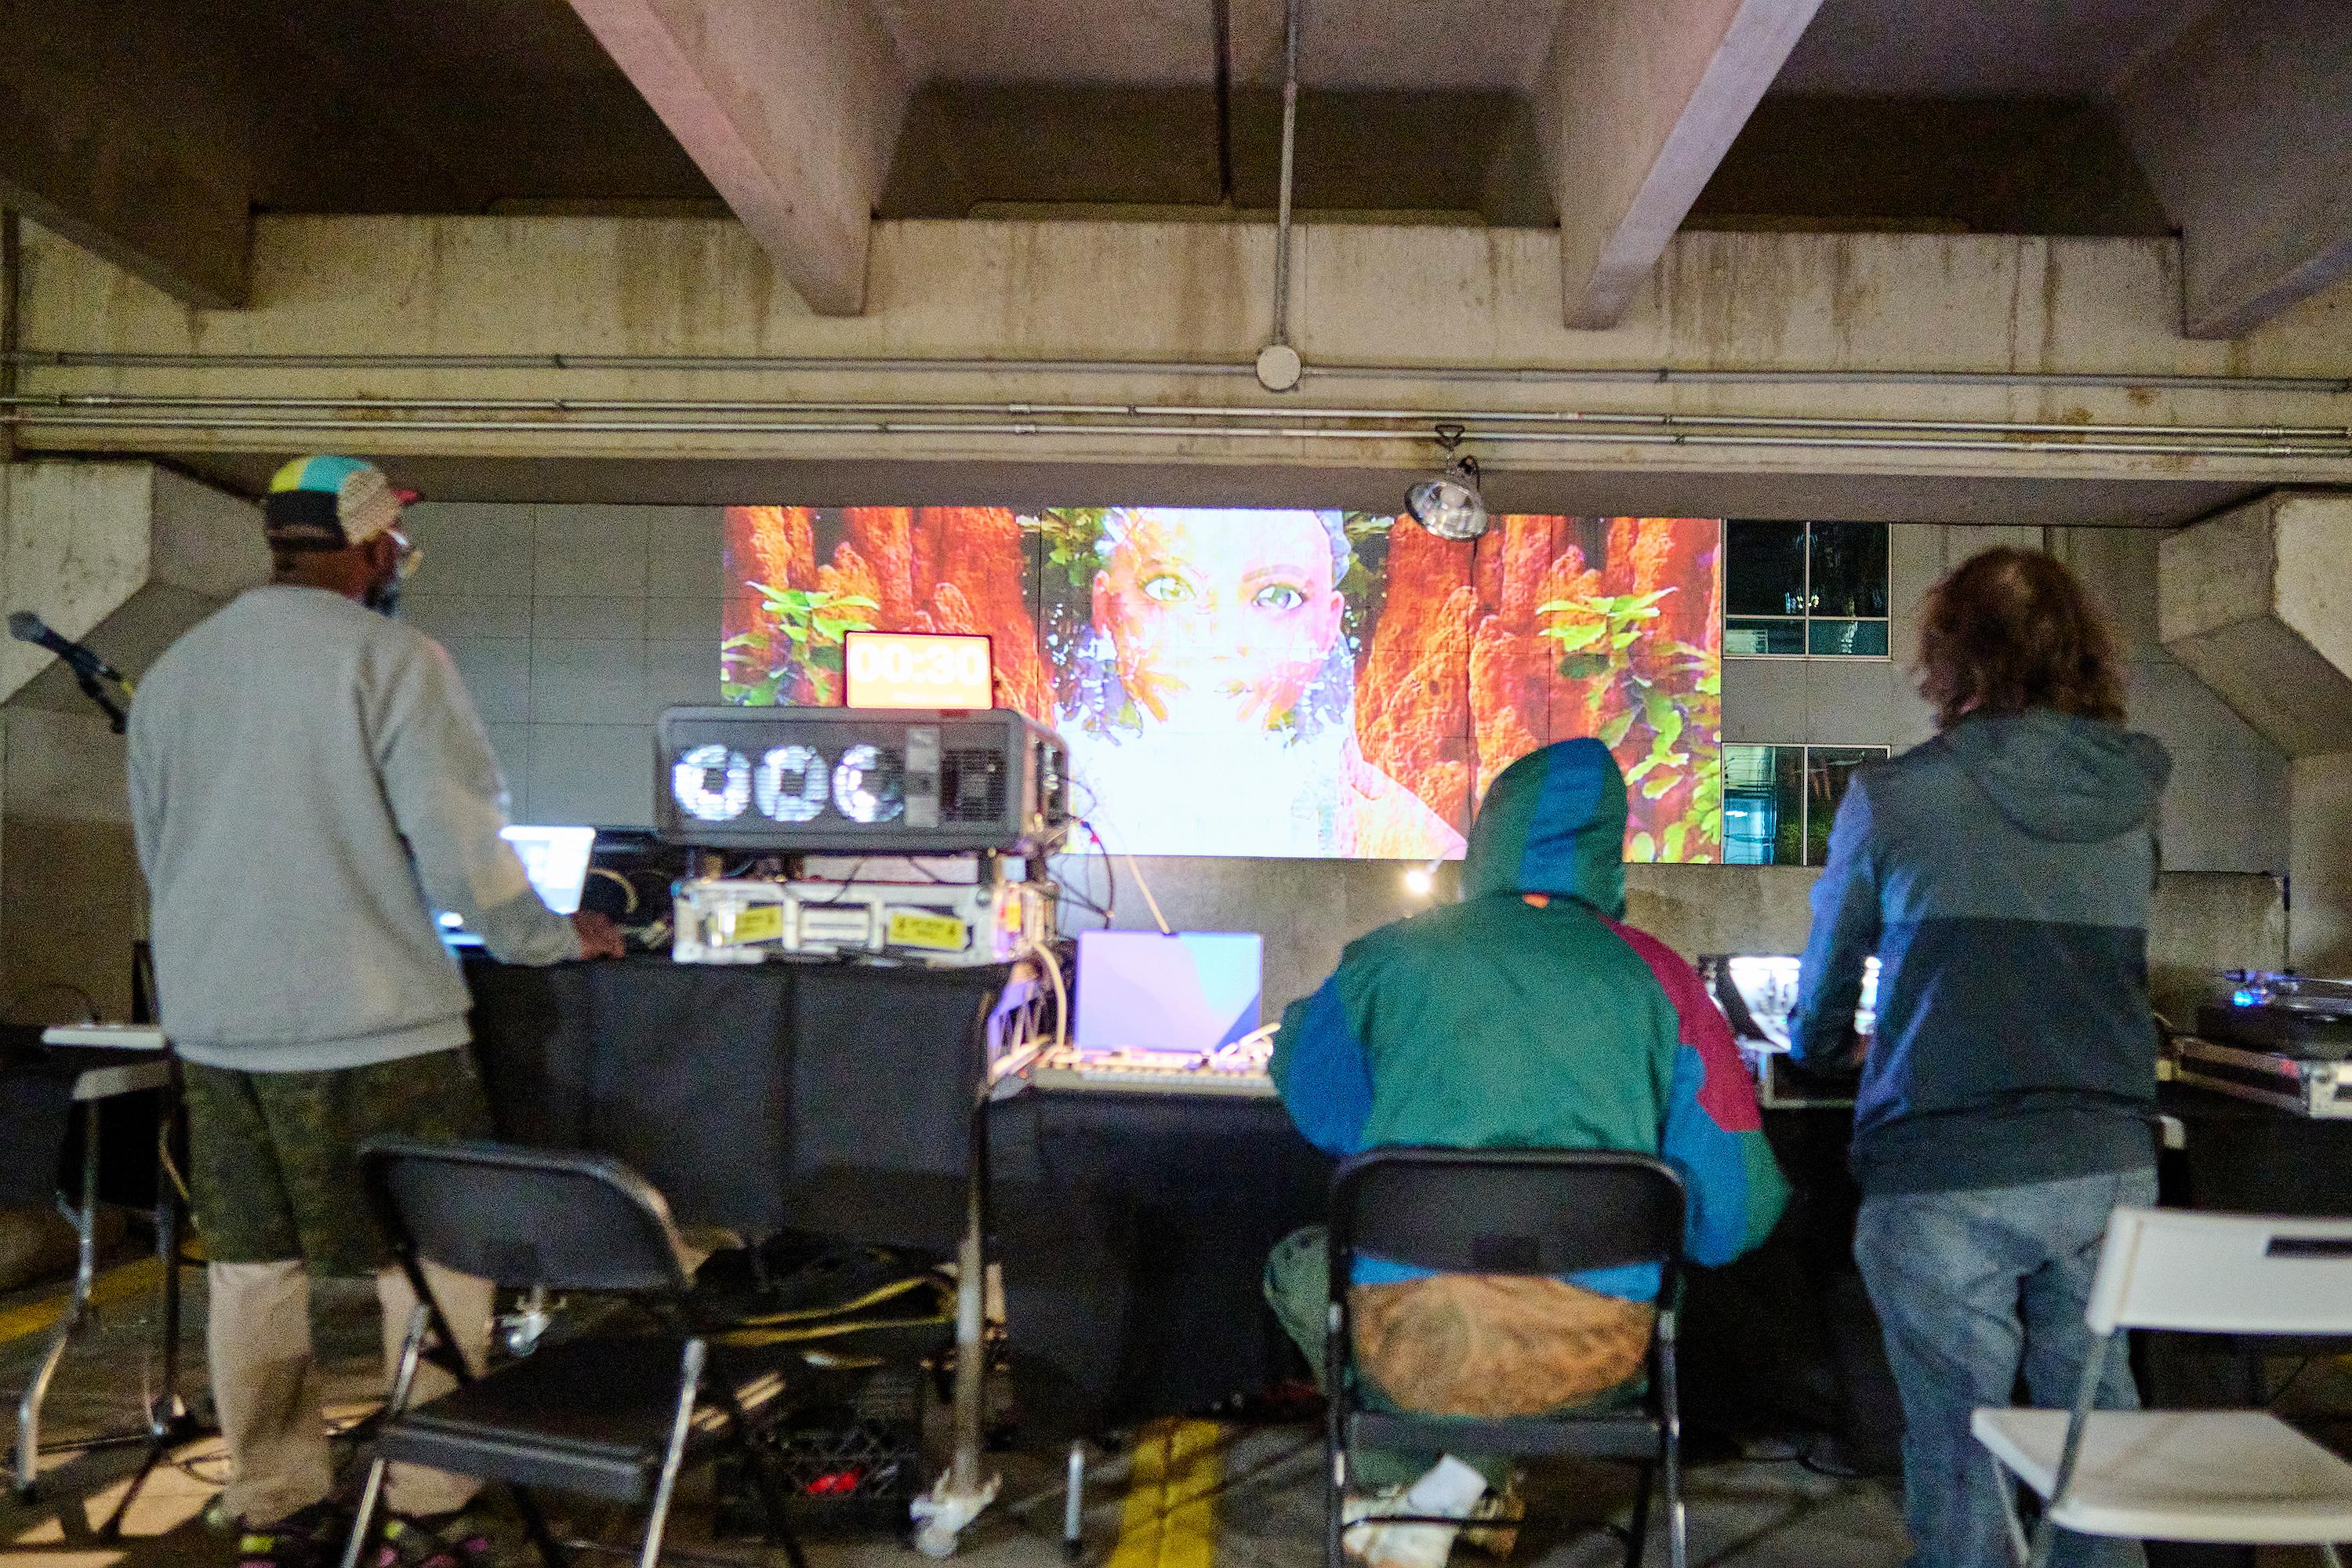 Photo by Albert Yee. Three people work at a table with computers and audio equipment DJing and coordinating a public video art installation projected onto the face of a building in front of them.